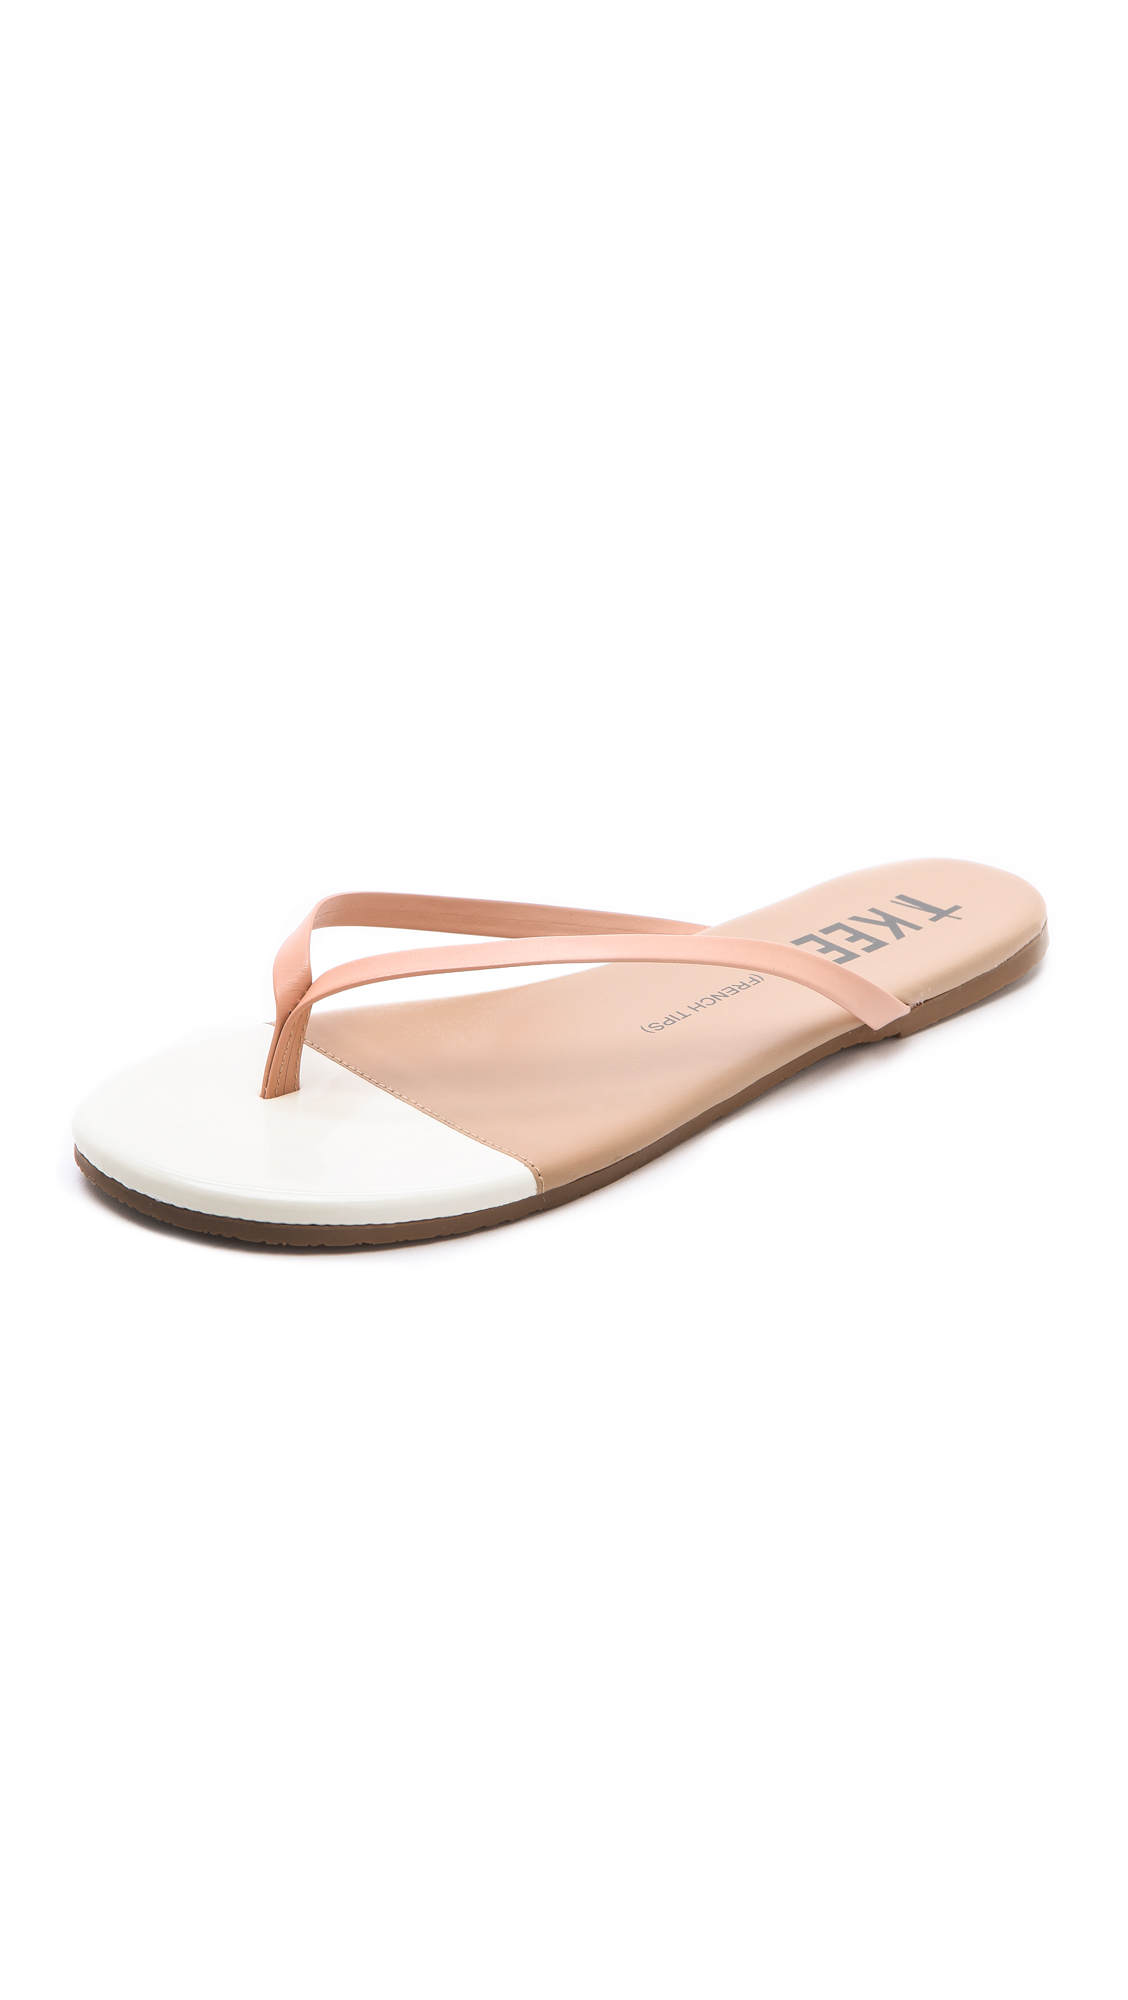 Tkees French Tips Flip Flops in Beige (ivory) | Lyst